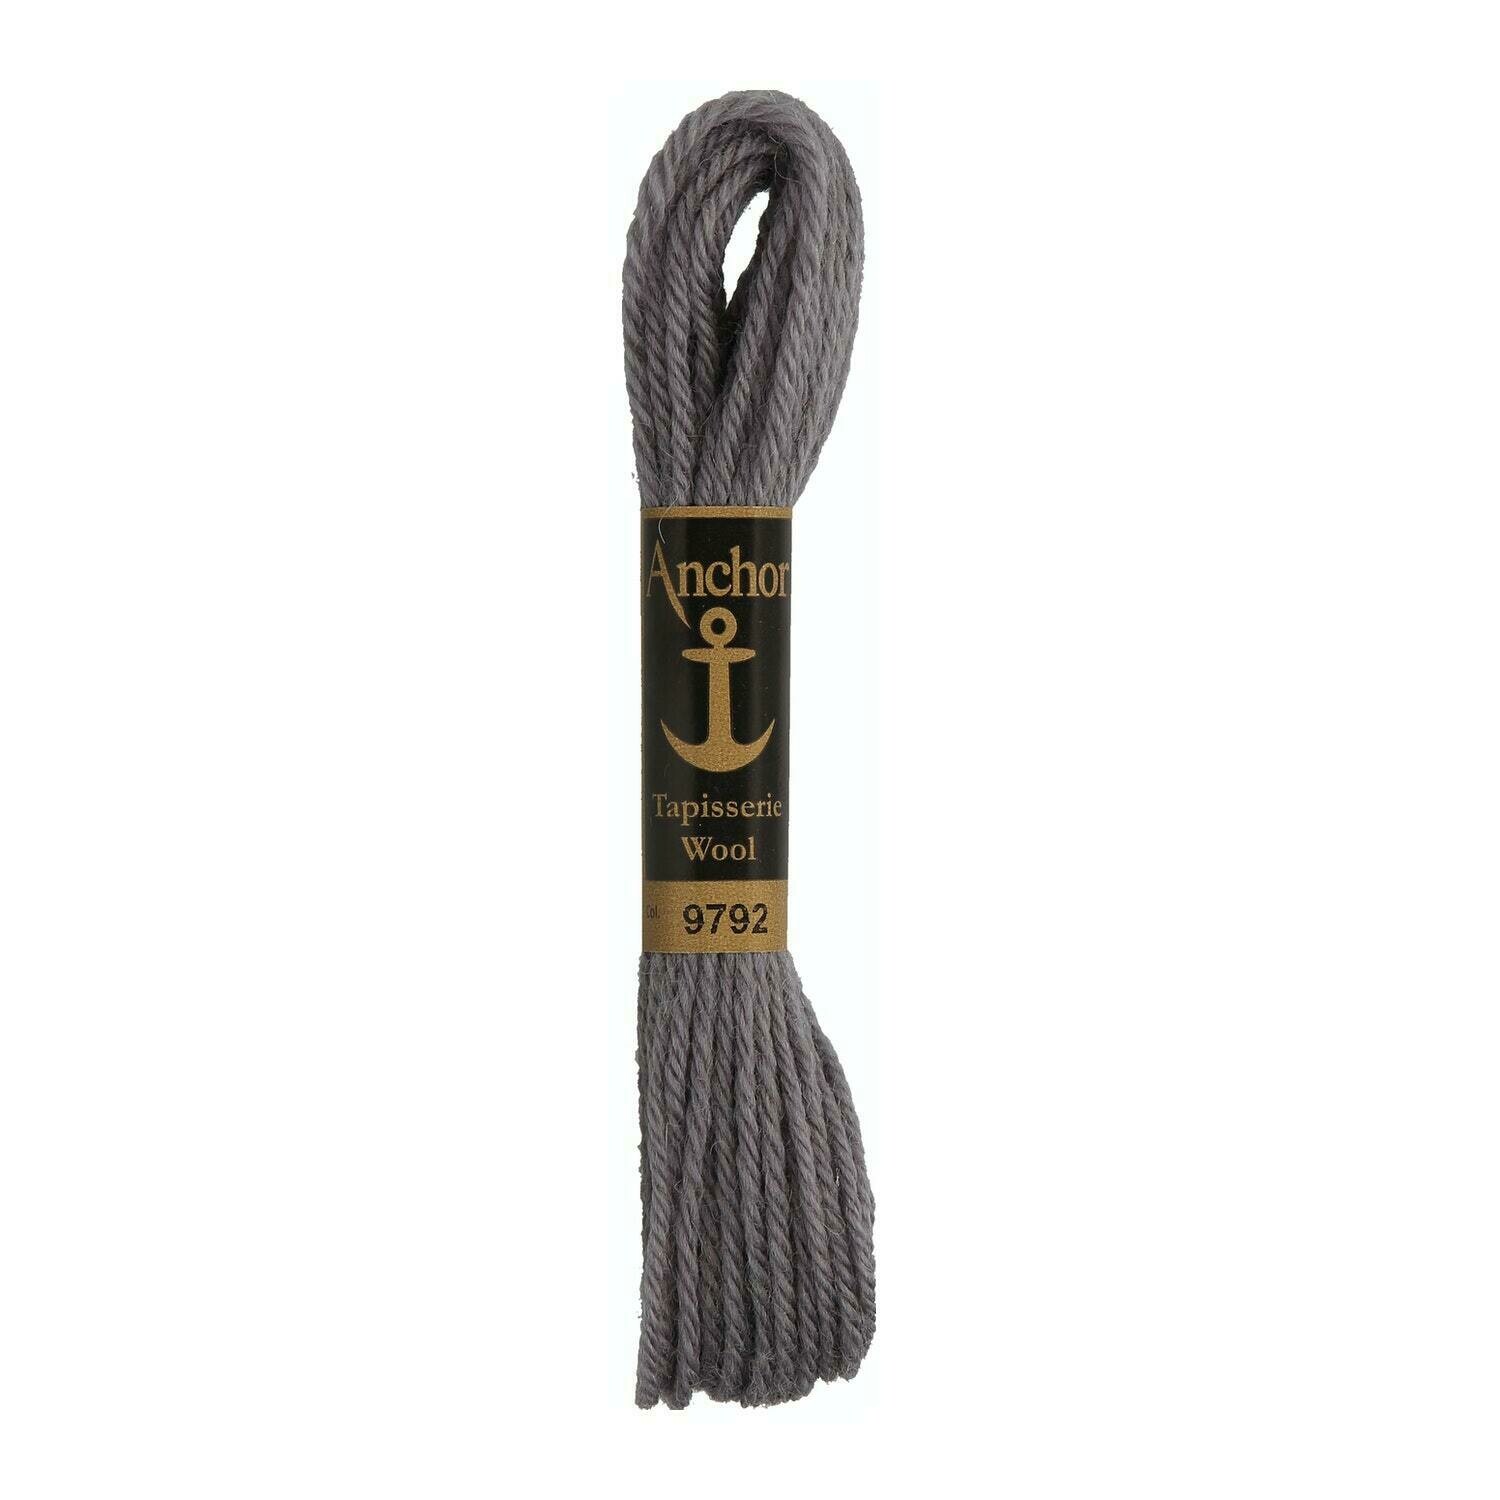 Anchor Tapisserie Wool #09792